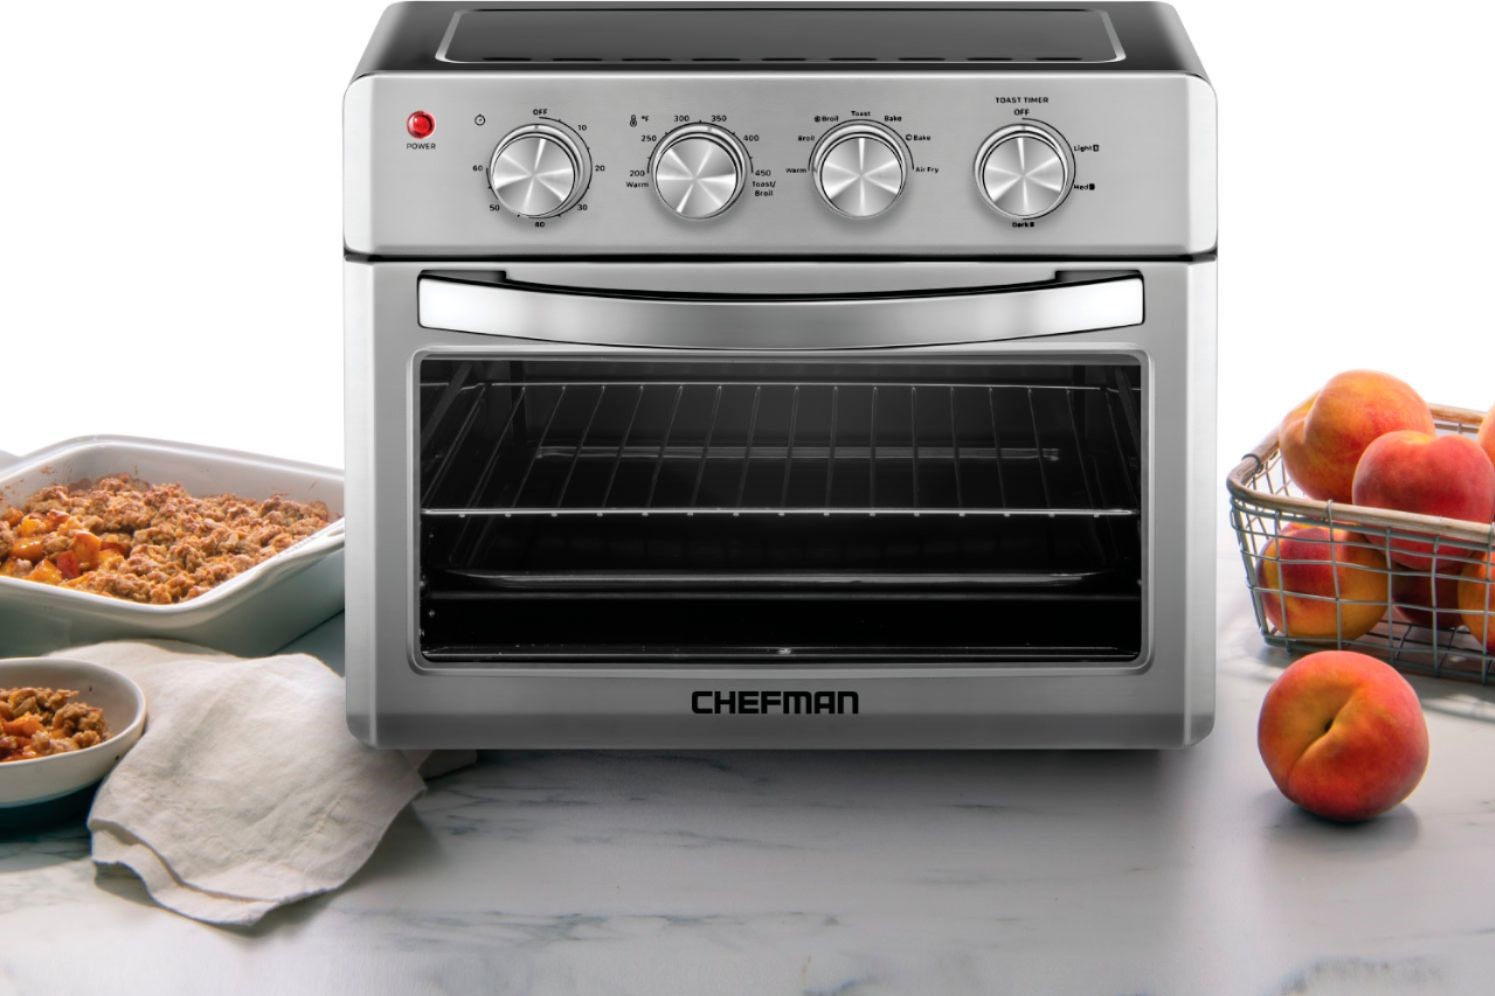 CHEFMAN Air Fryer Toaster Oven XL 20L, Healthy Cooking & User Friendly,  Countertop Convection Bake & Broil, 9 Cooking Functions, Auto Shut-Off 60  Min